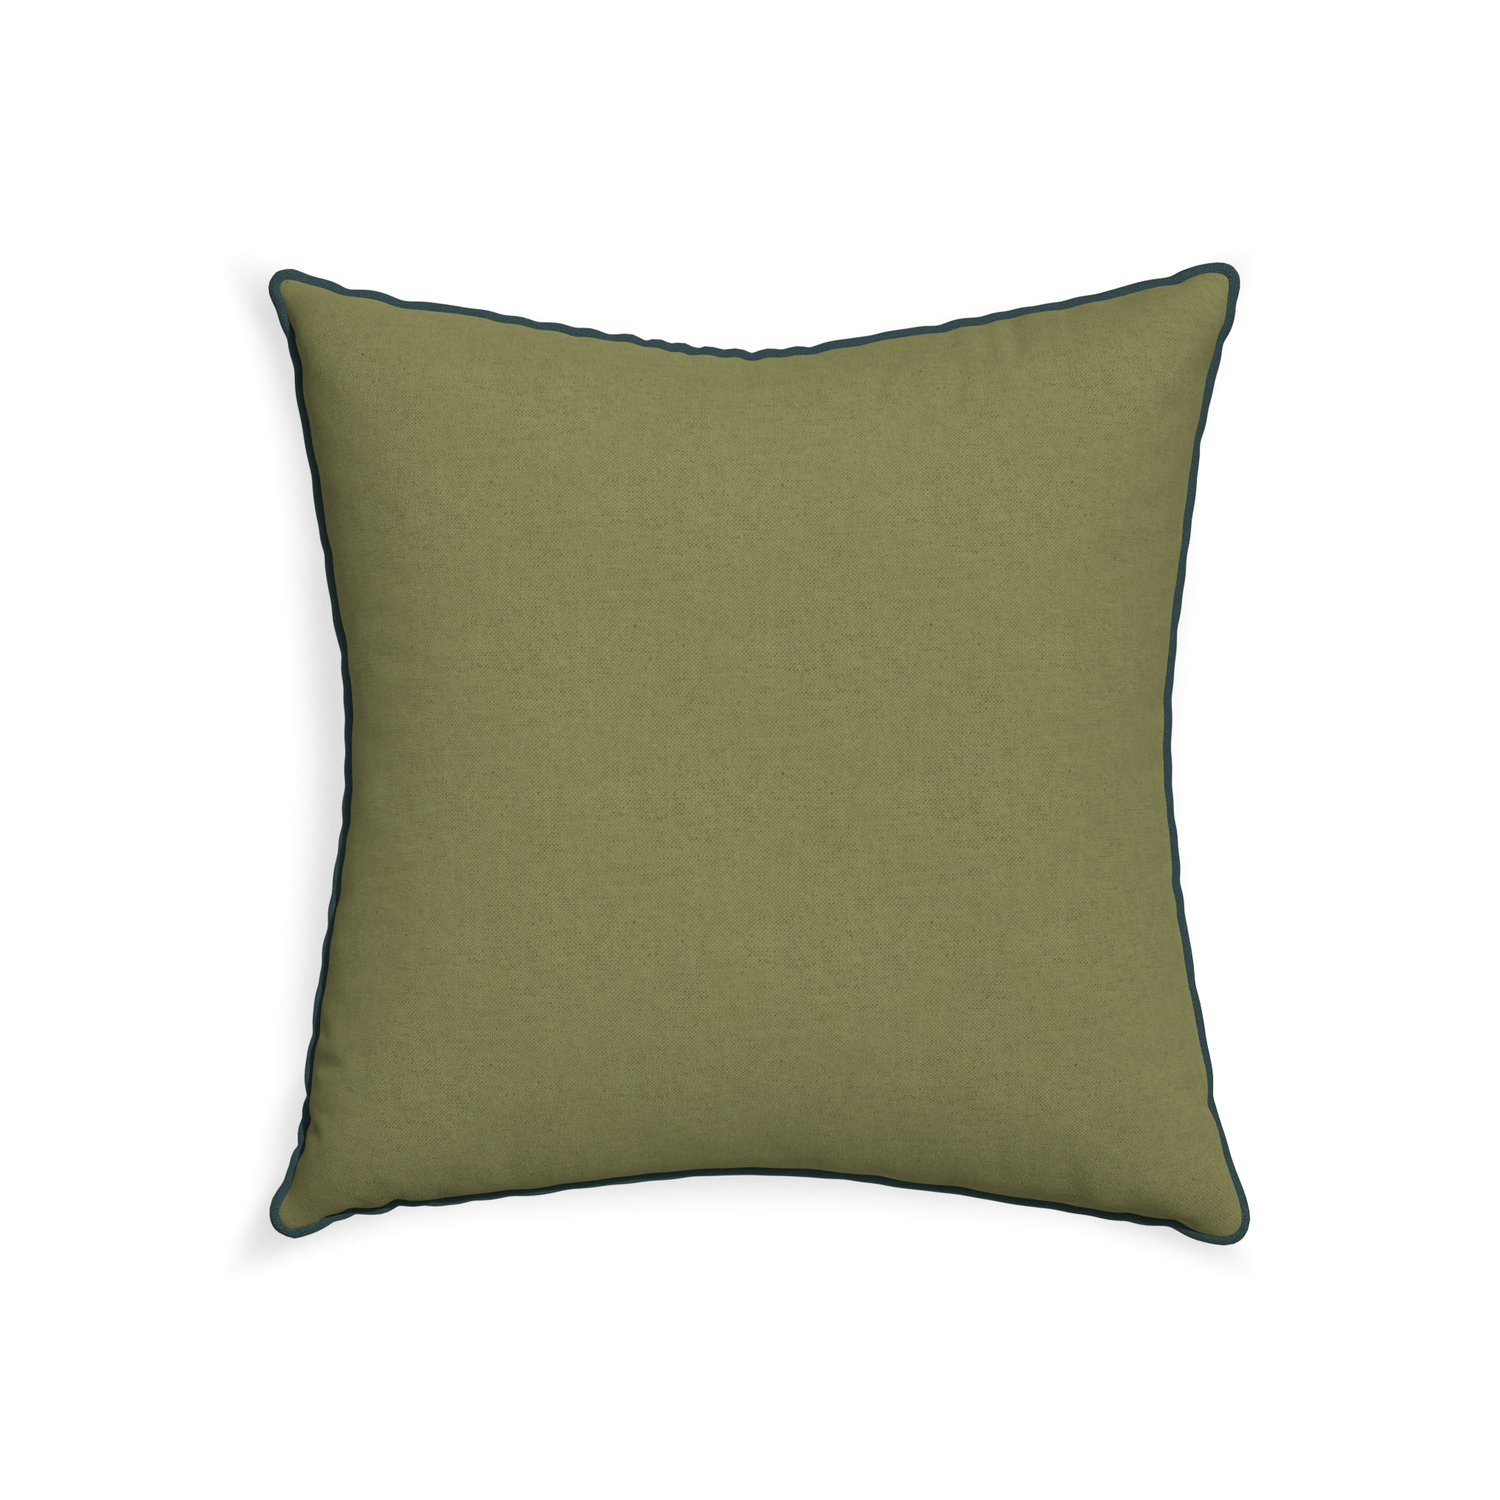 22-square moss custom moss greenpillow with p piping on white background